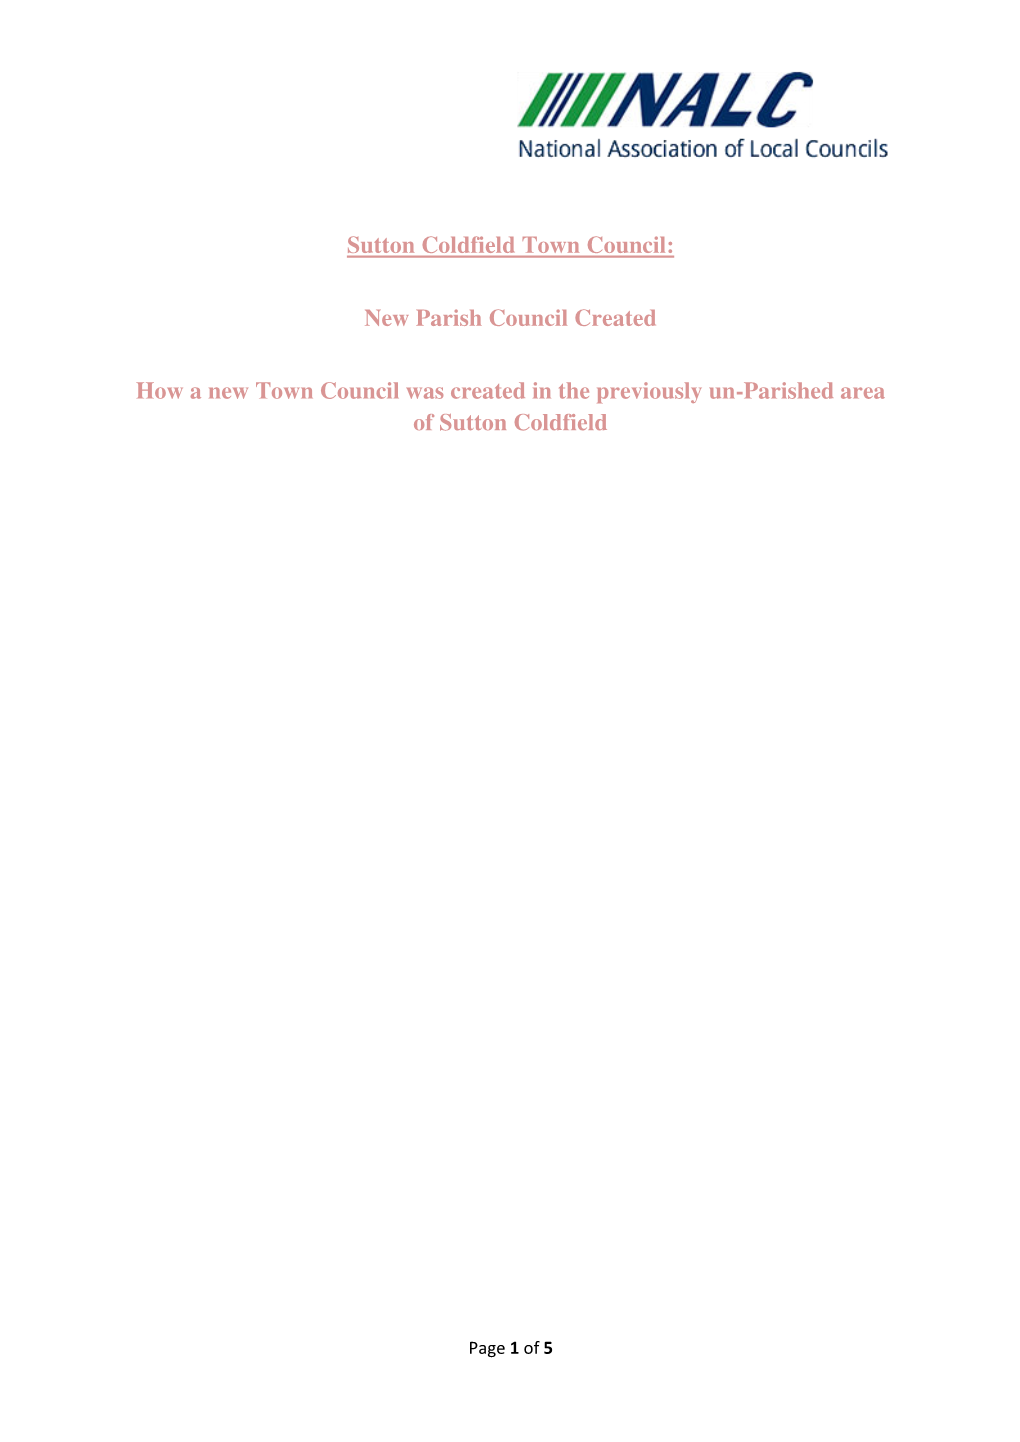 Sutton Coldfield Town Council: New Parish Council Created How a New